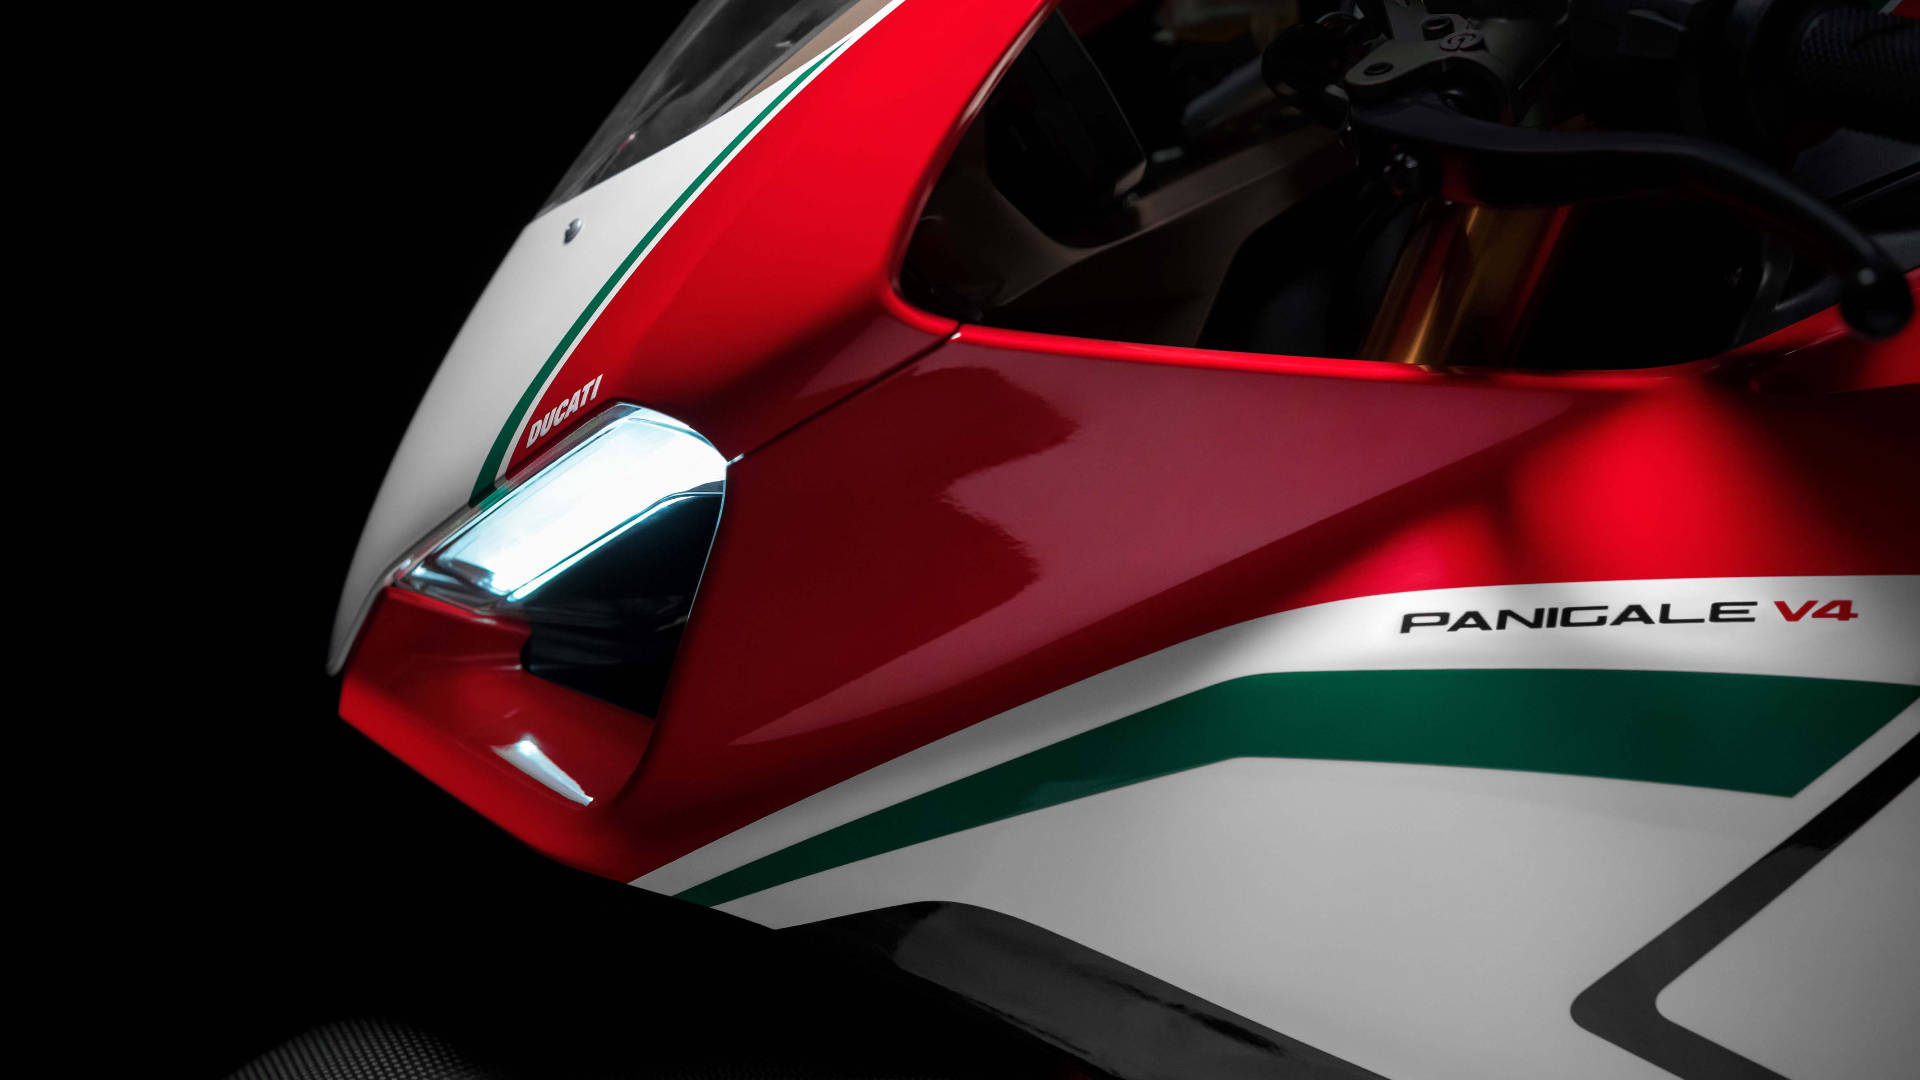 The Legendary Ducati Panigale V4 Speciale Wallpaper